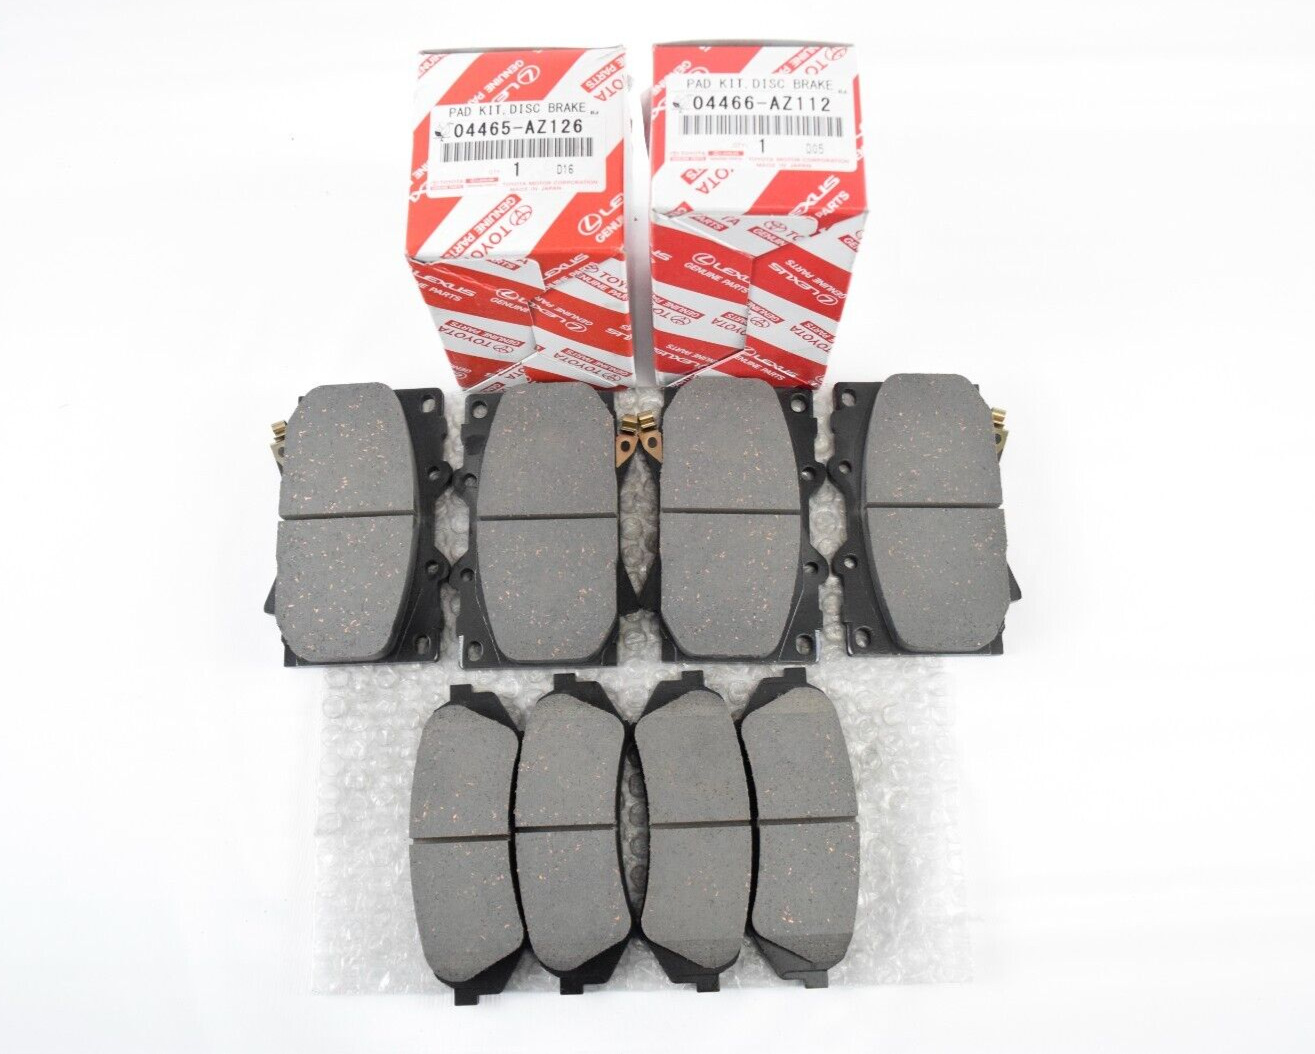 Genuine Lexus LX470 1998-2007 Front and Rear Brake Pad Sets 